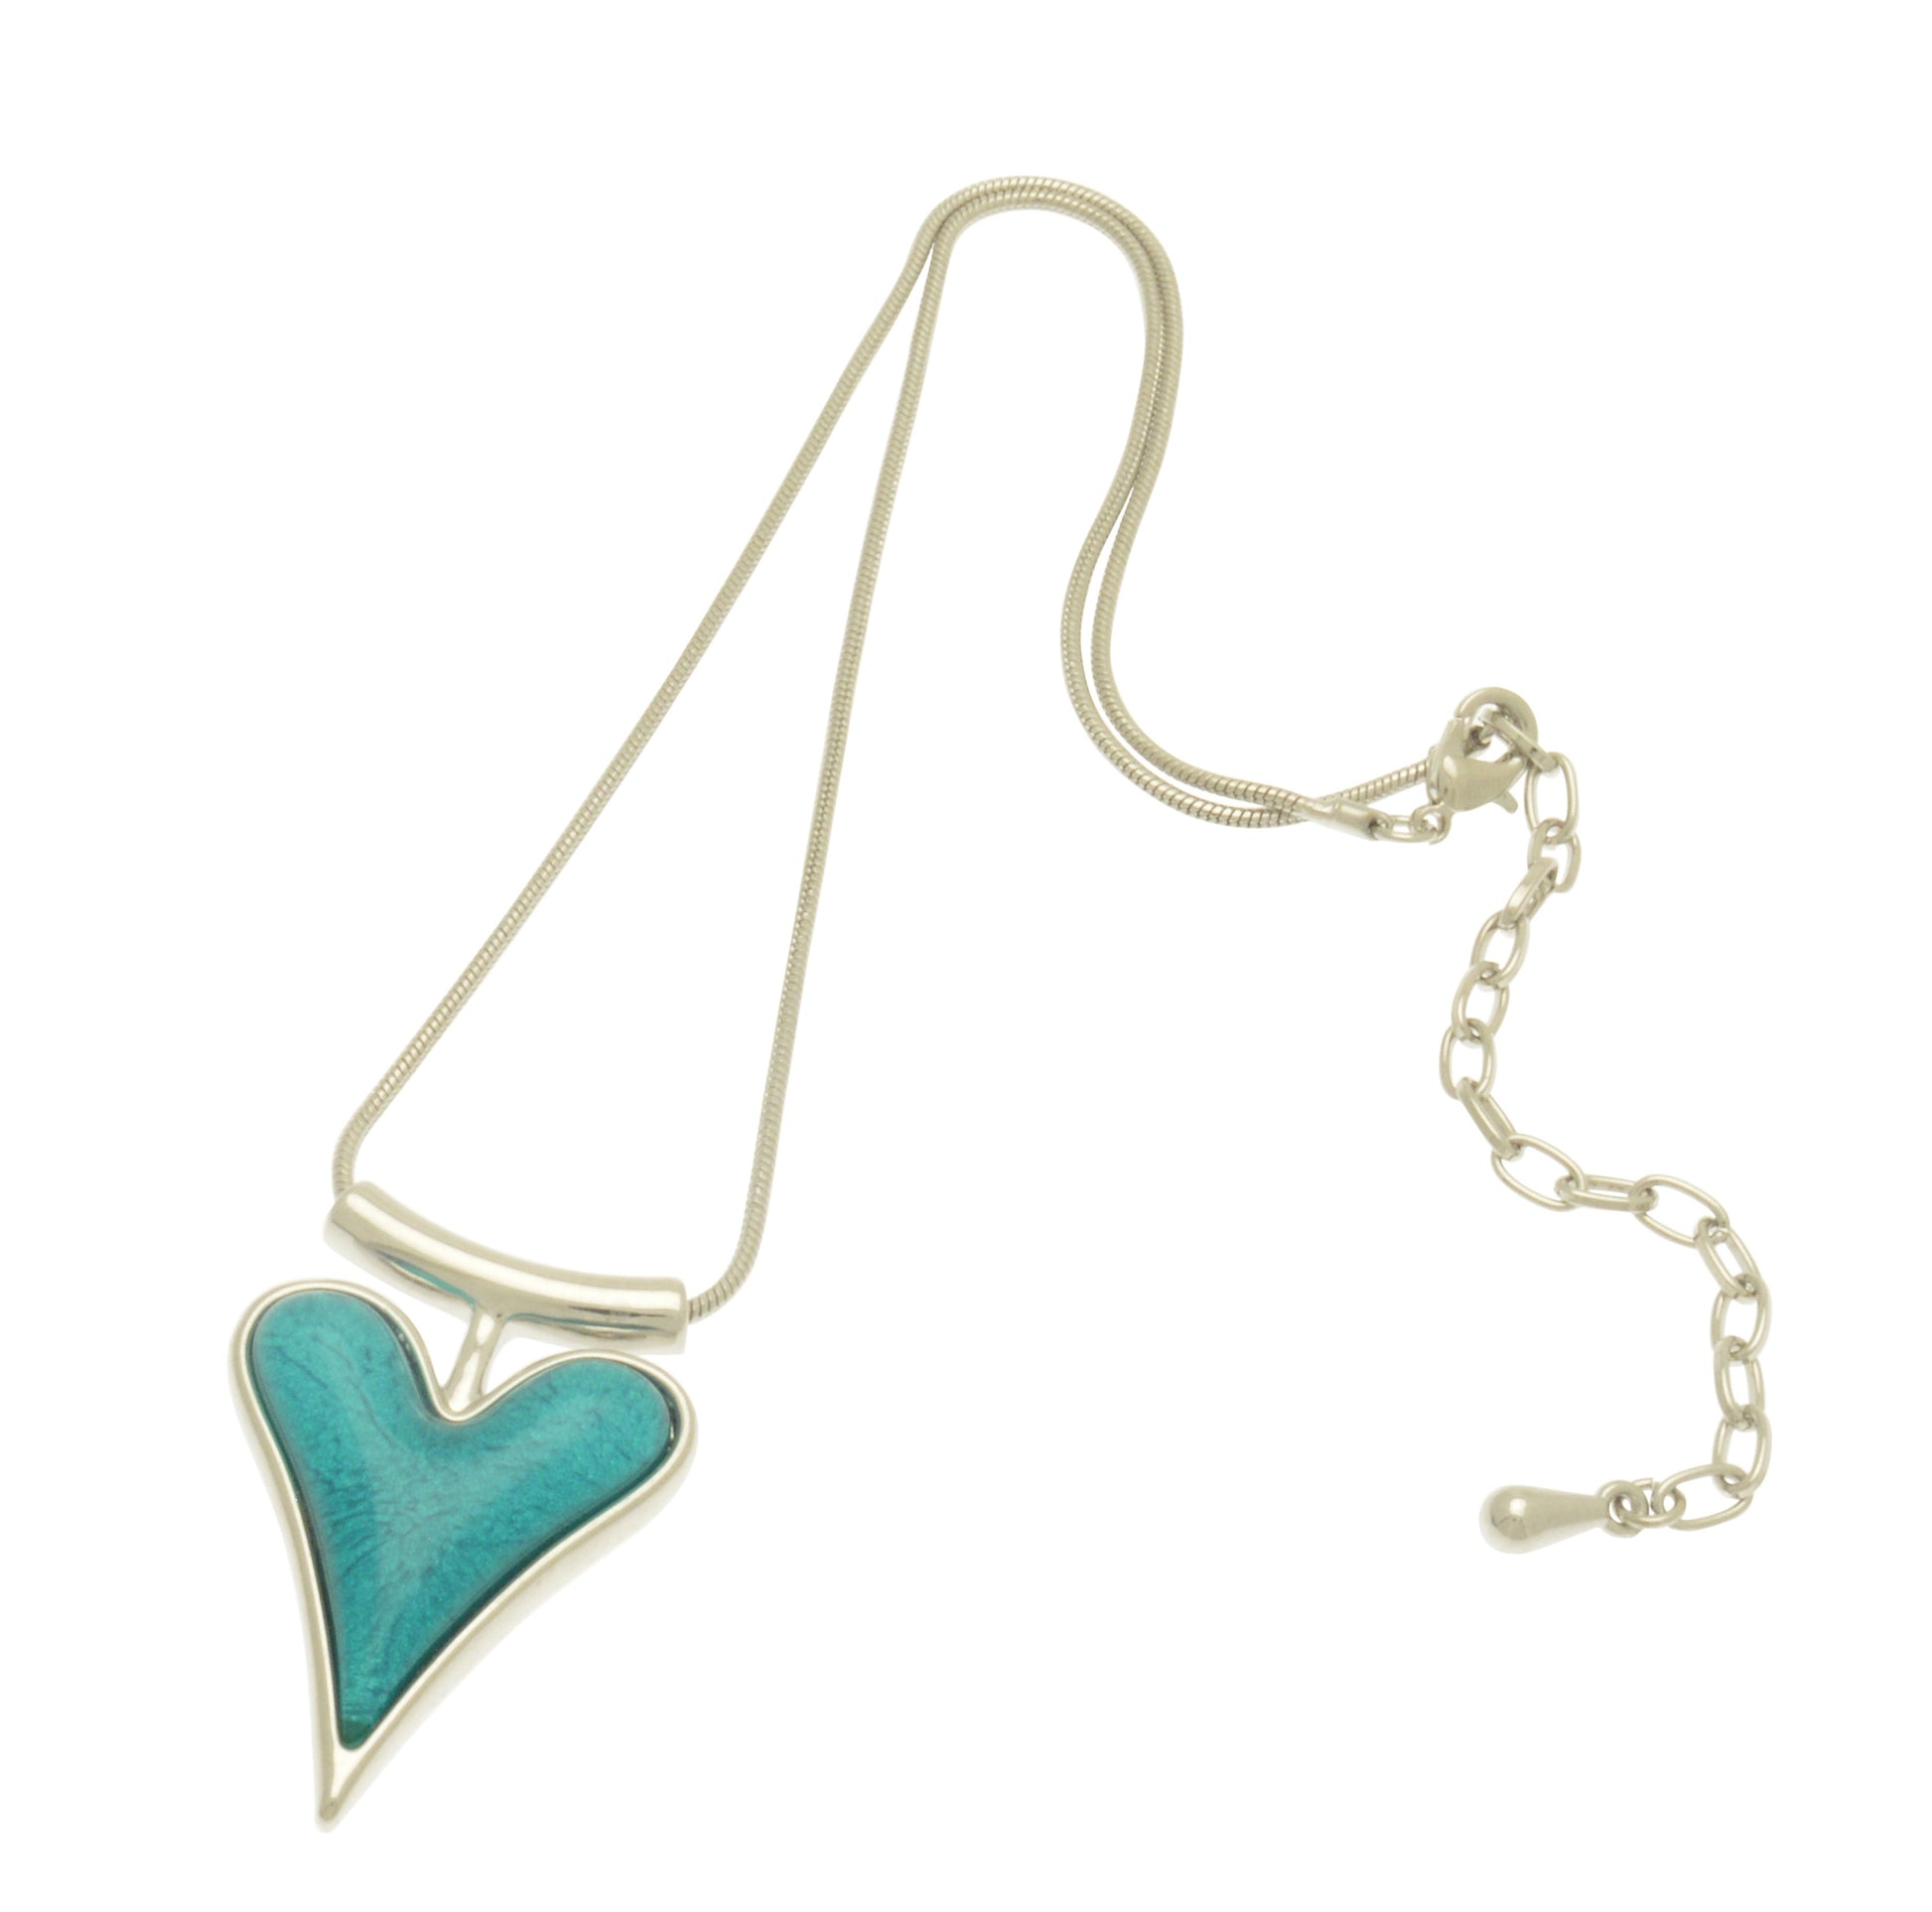 Teal Resin Heart Necklace